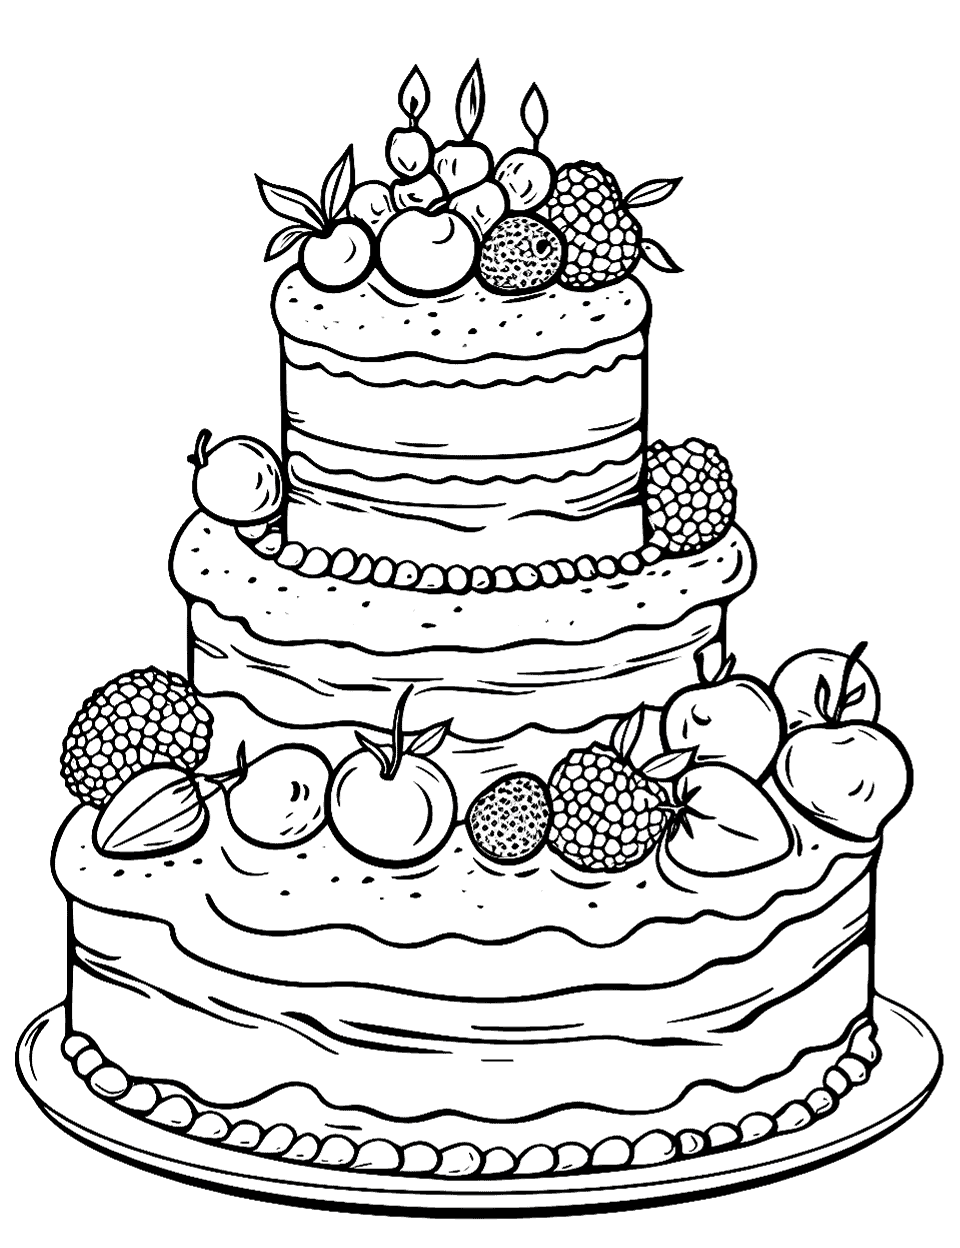 Fruit Fiesta Cake Coloring Page - A cake topped with an assortment of fresh fruits.